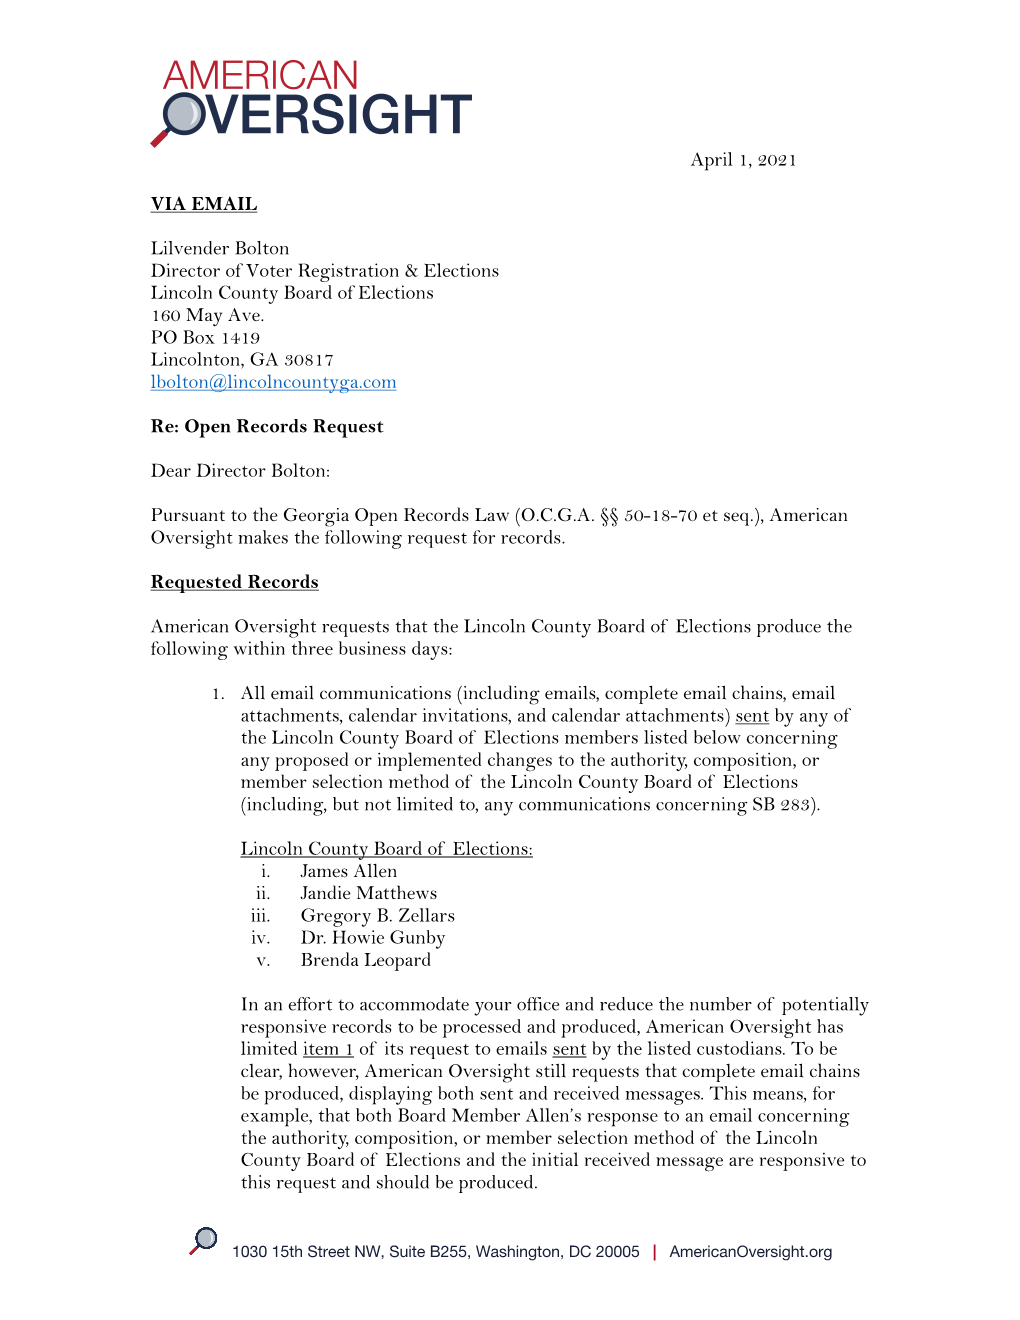 GA-LINCOLN-21-0441 Guidance Regarding the Search & Processing of Requested Records